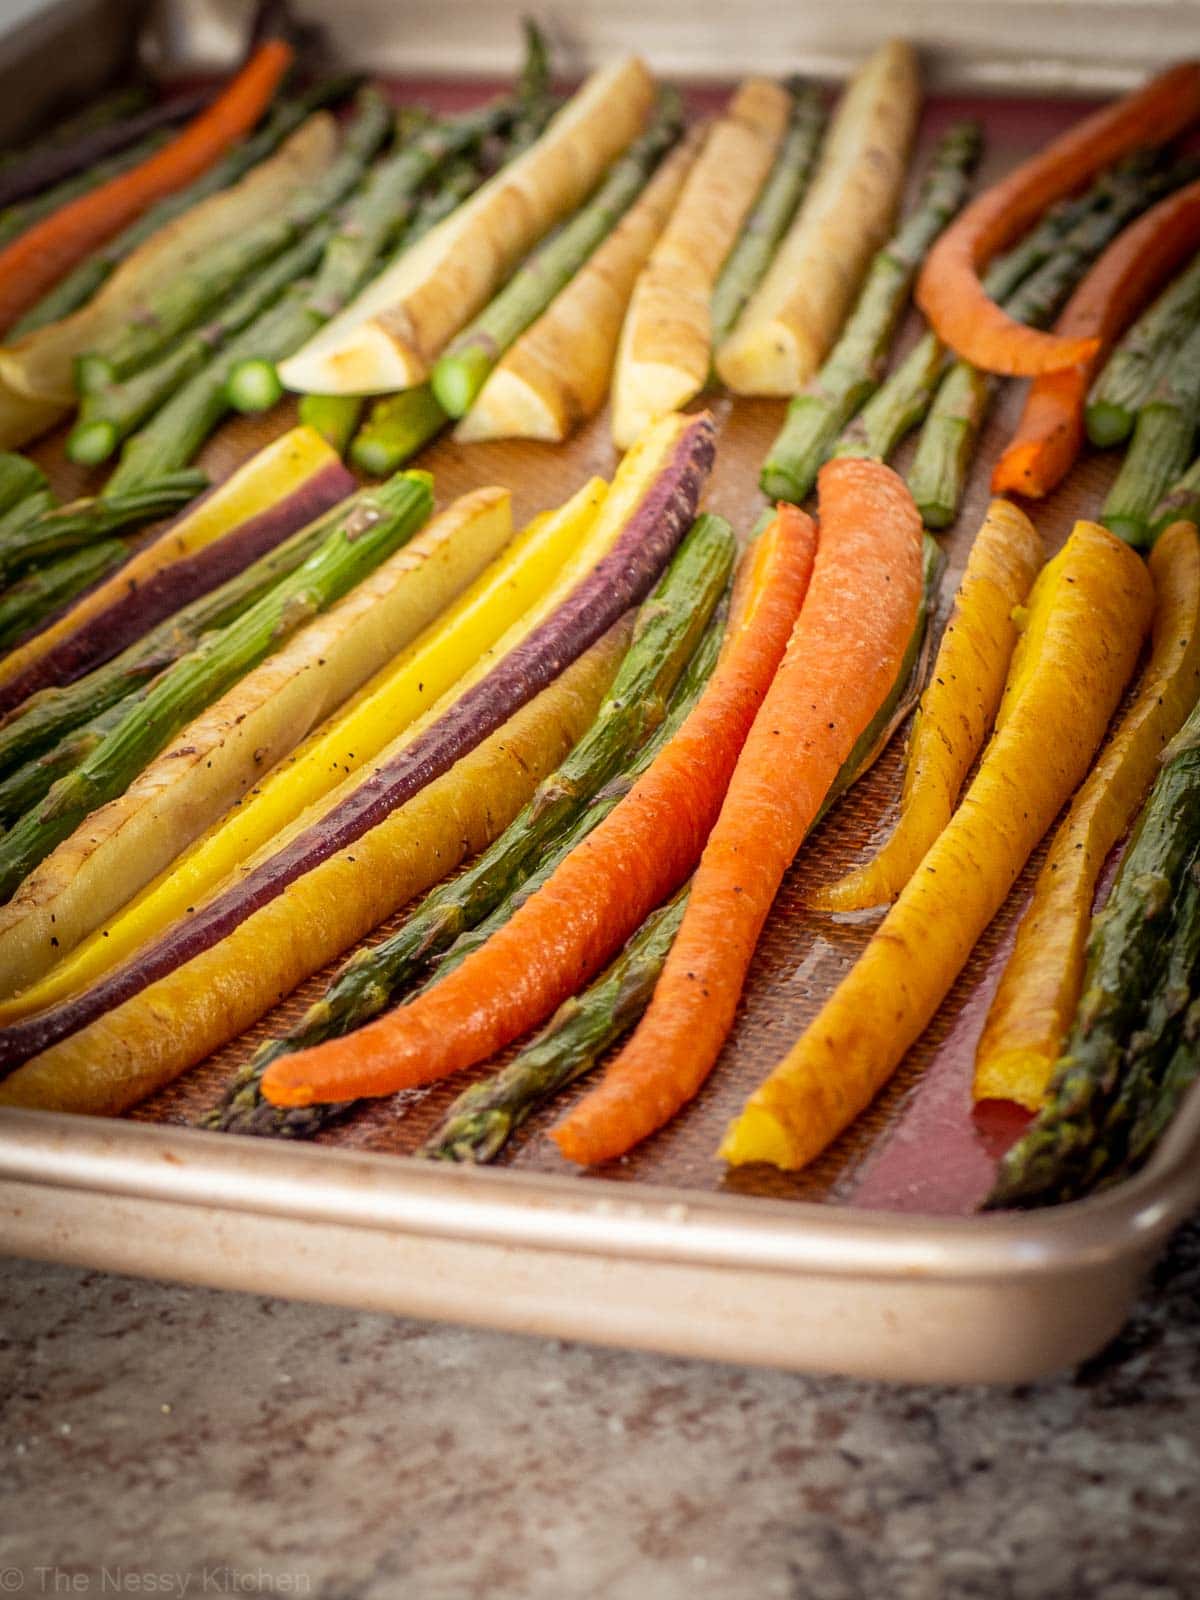 Carrots and asparagus in a baking sheet.